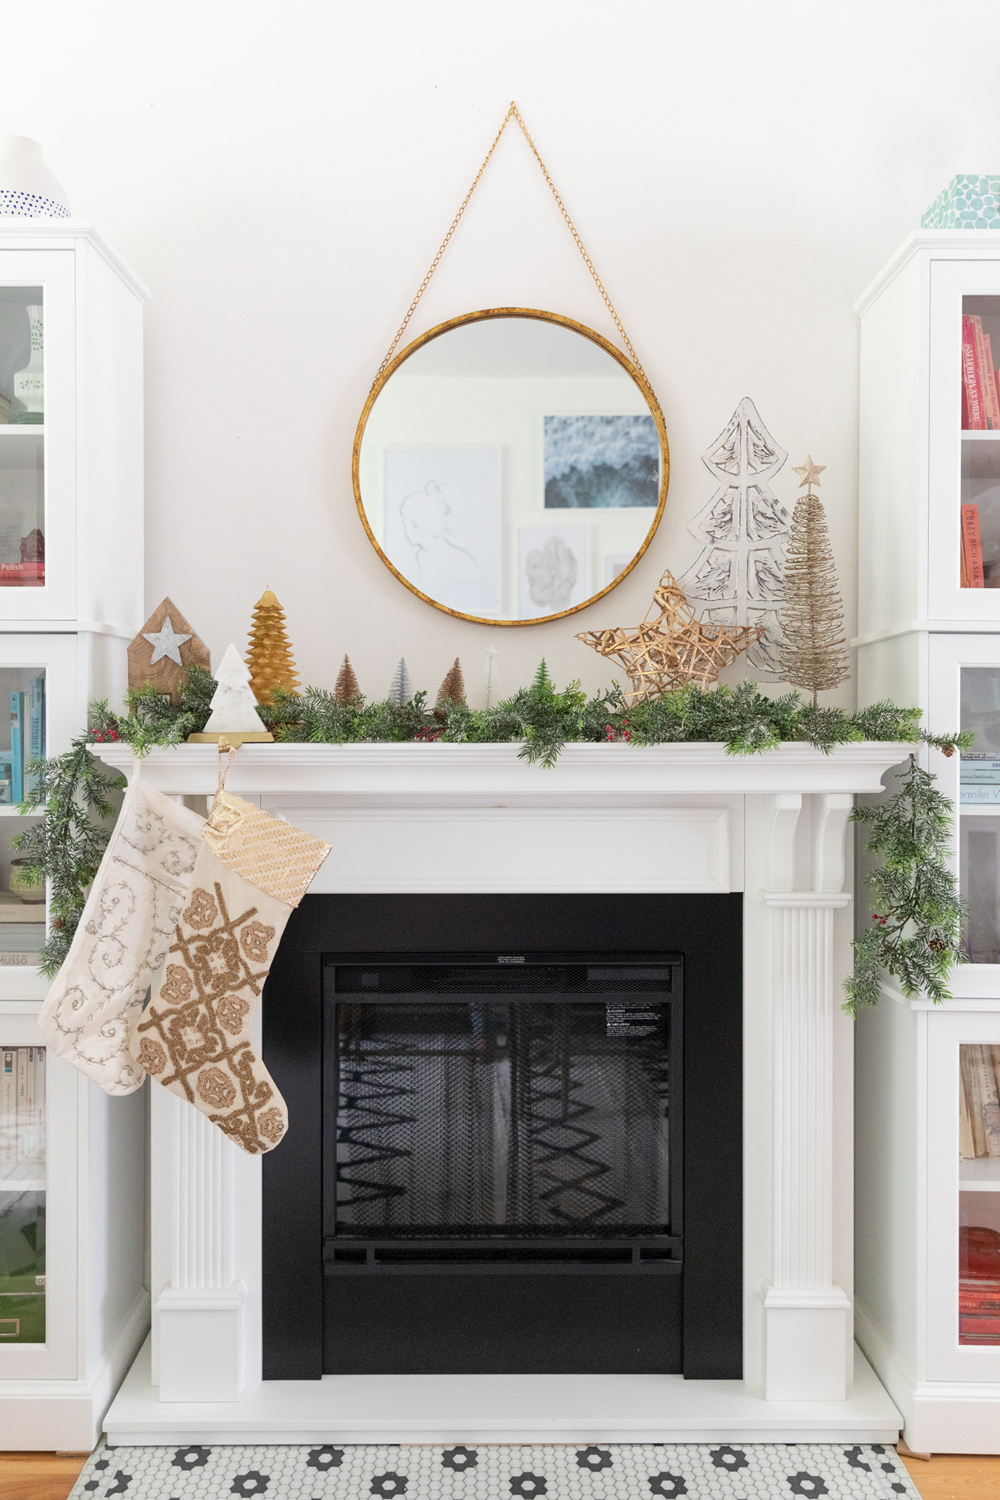 A gas fireplace decorated with Christmas decor, including stockings